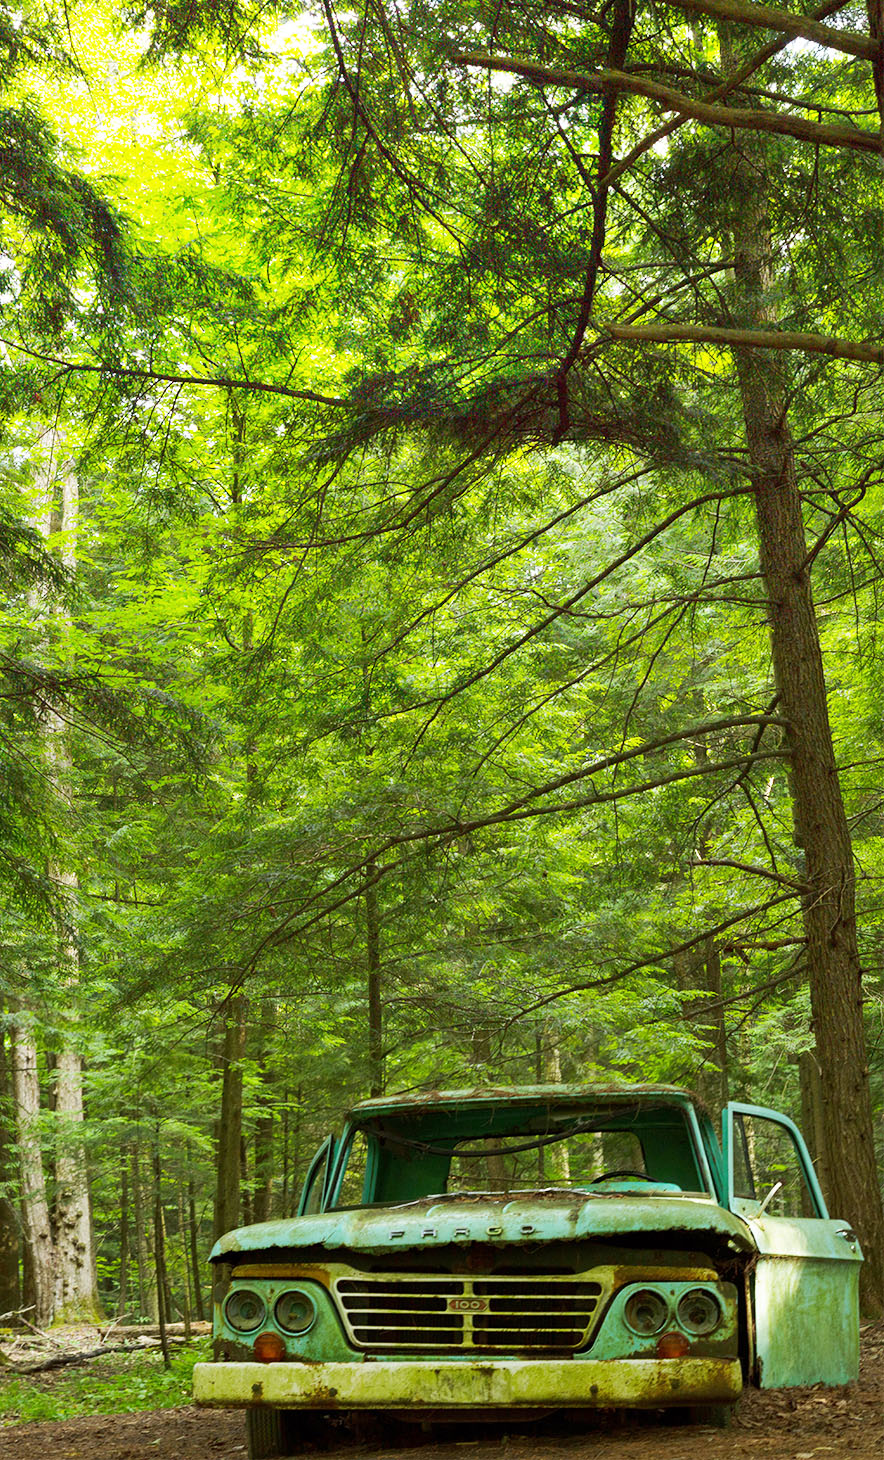 old truck in Grant's Woods